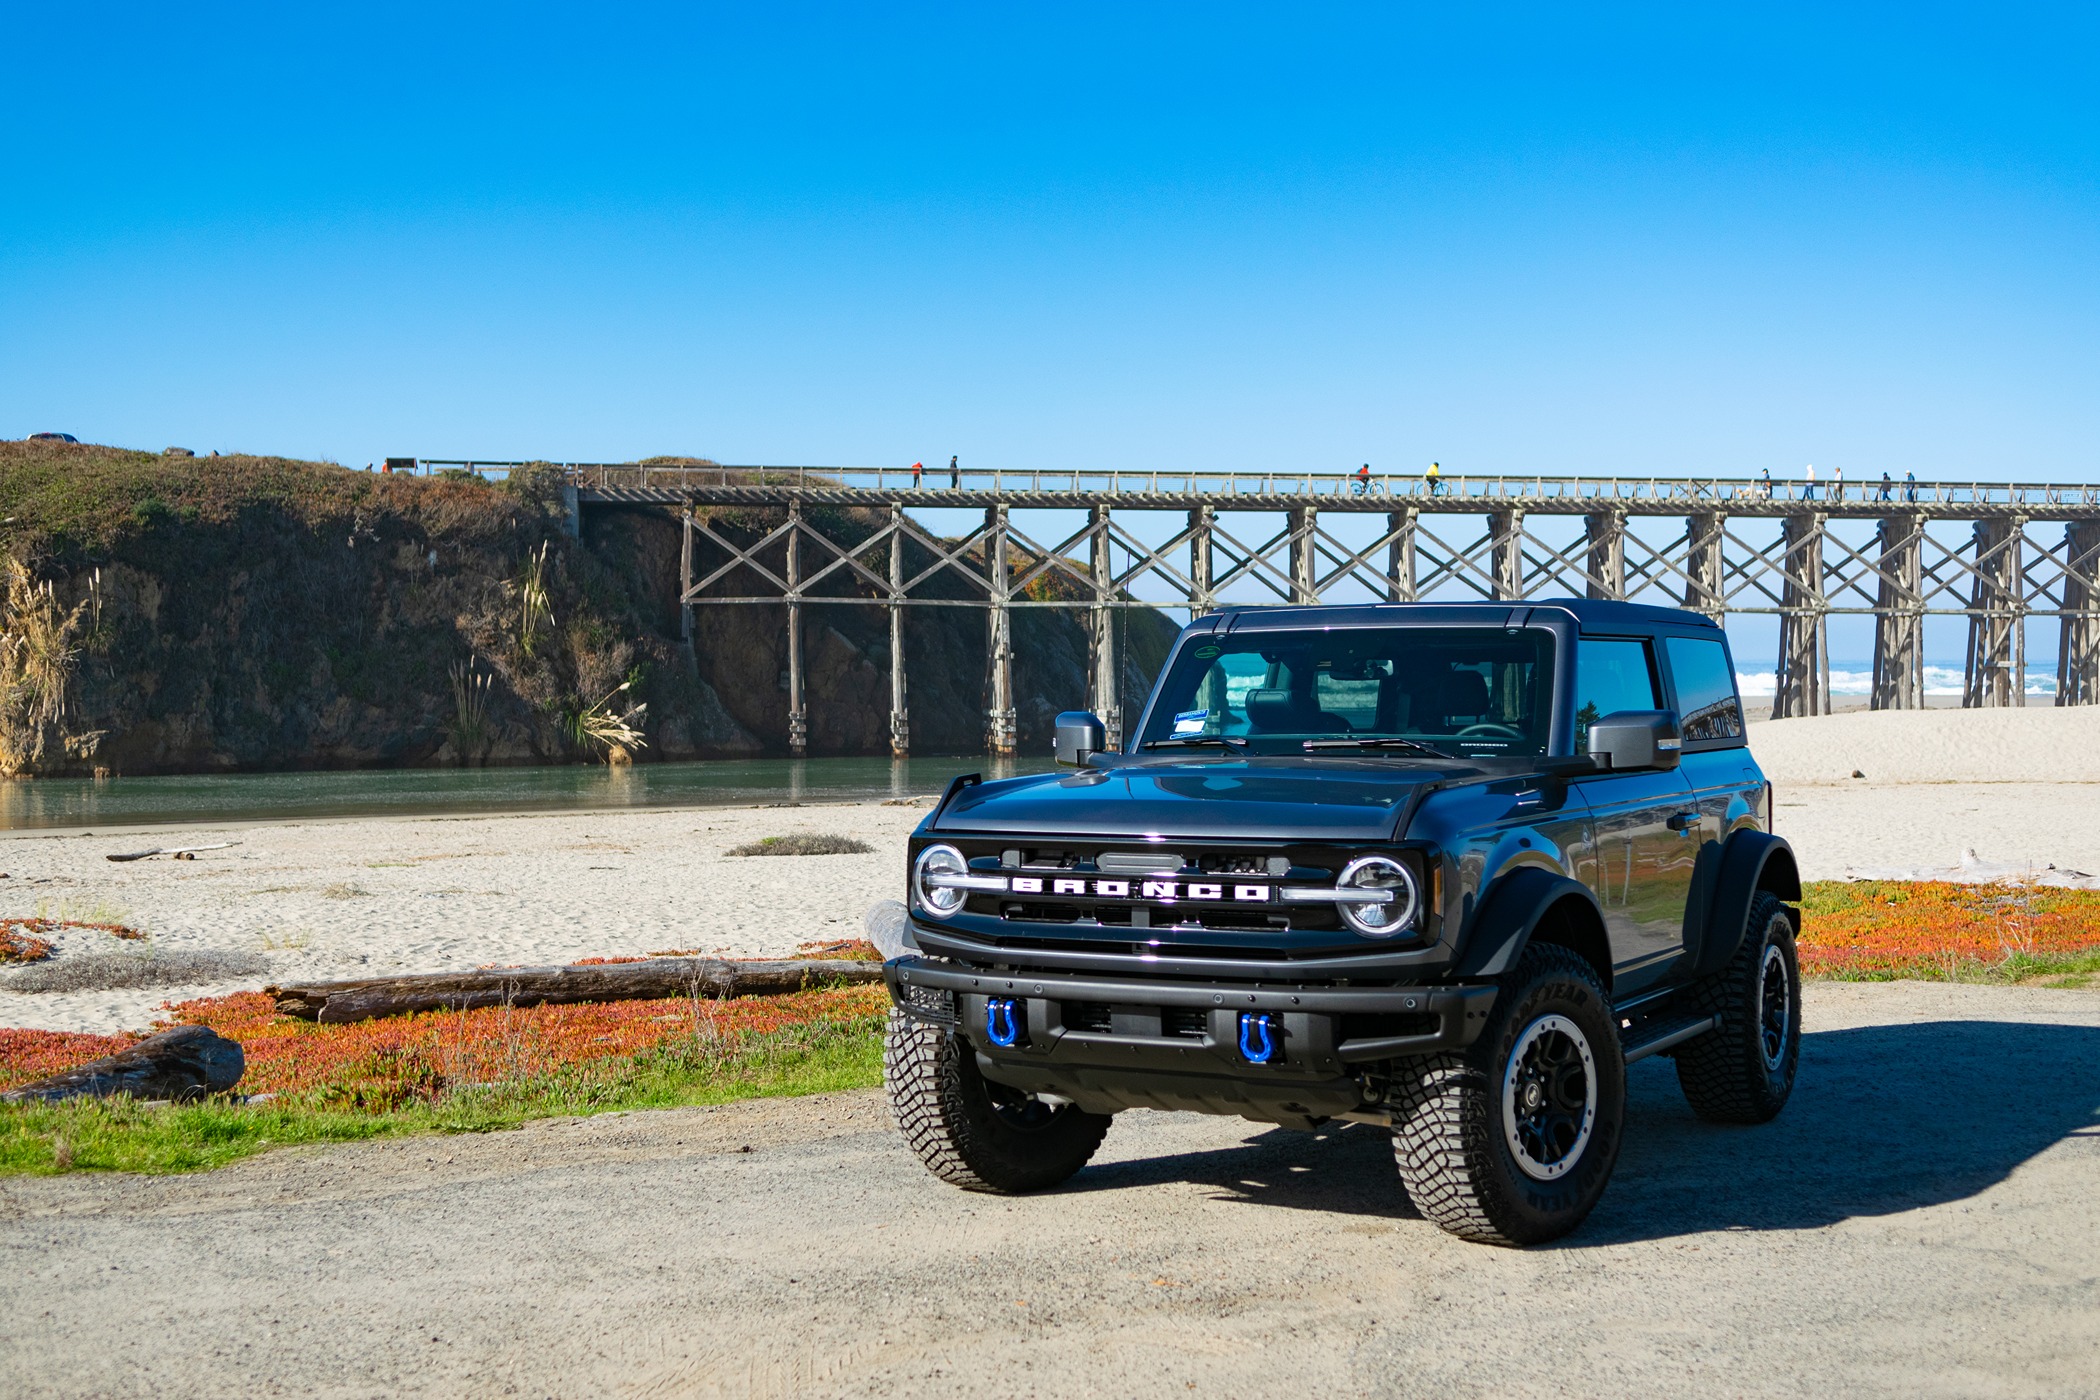 Ford Bronco First official photo - what’s yours? 1711243137626-n0